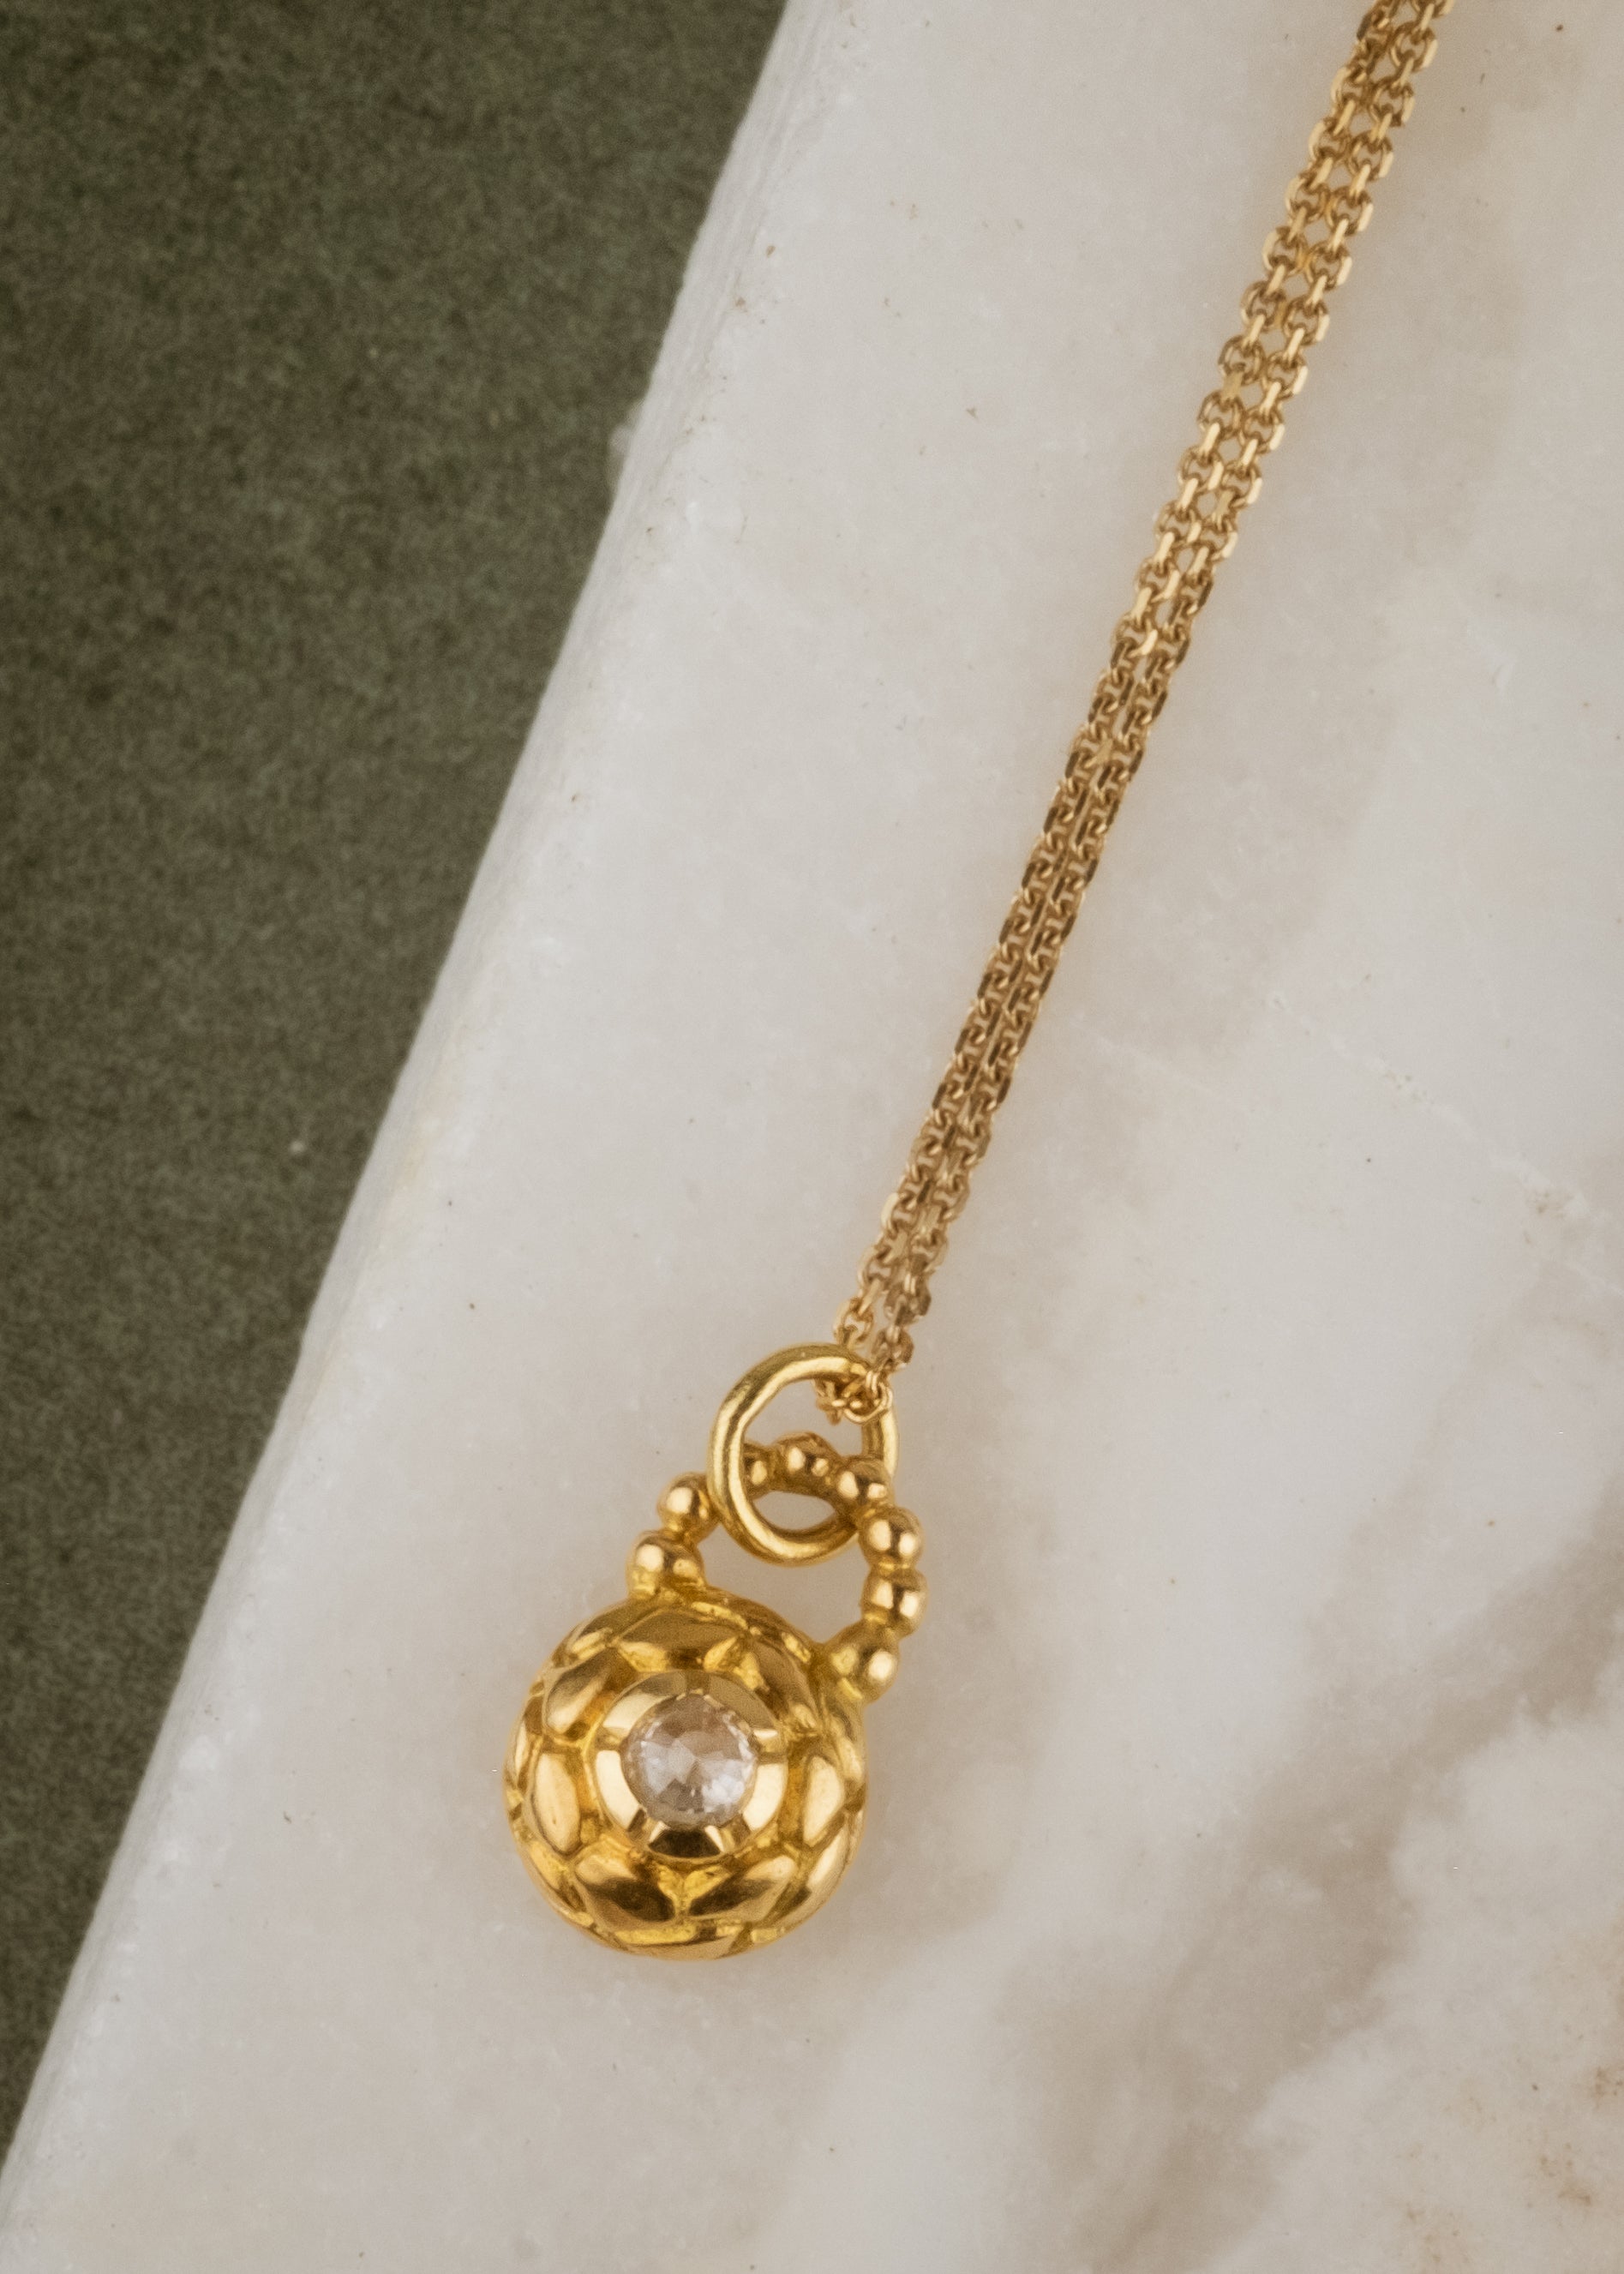 Featuring intricate hand-carved beads that center around a brilliant rose cut diamond, the Marquis necklace is fit for royalty and reimagined for everyday wear. 